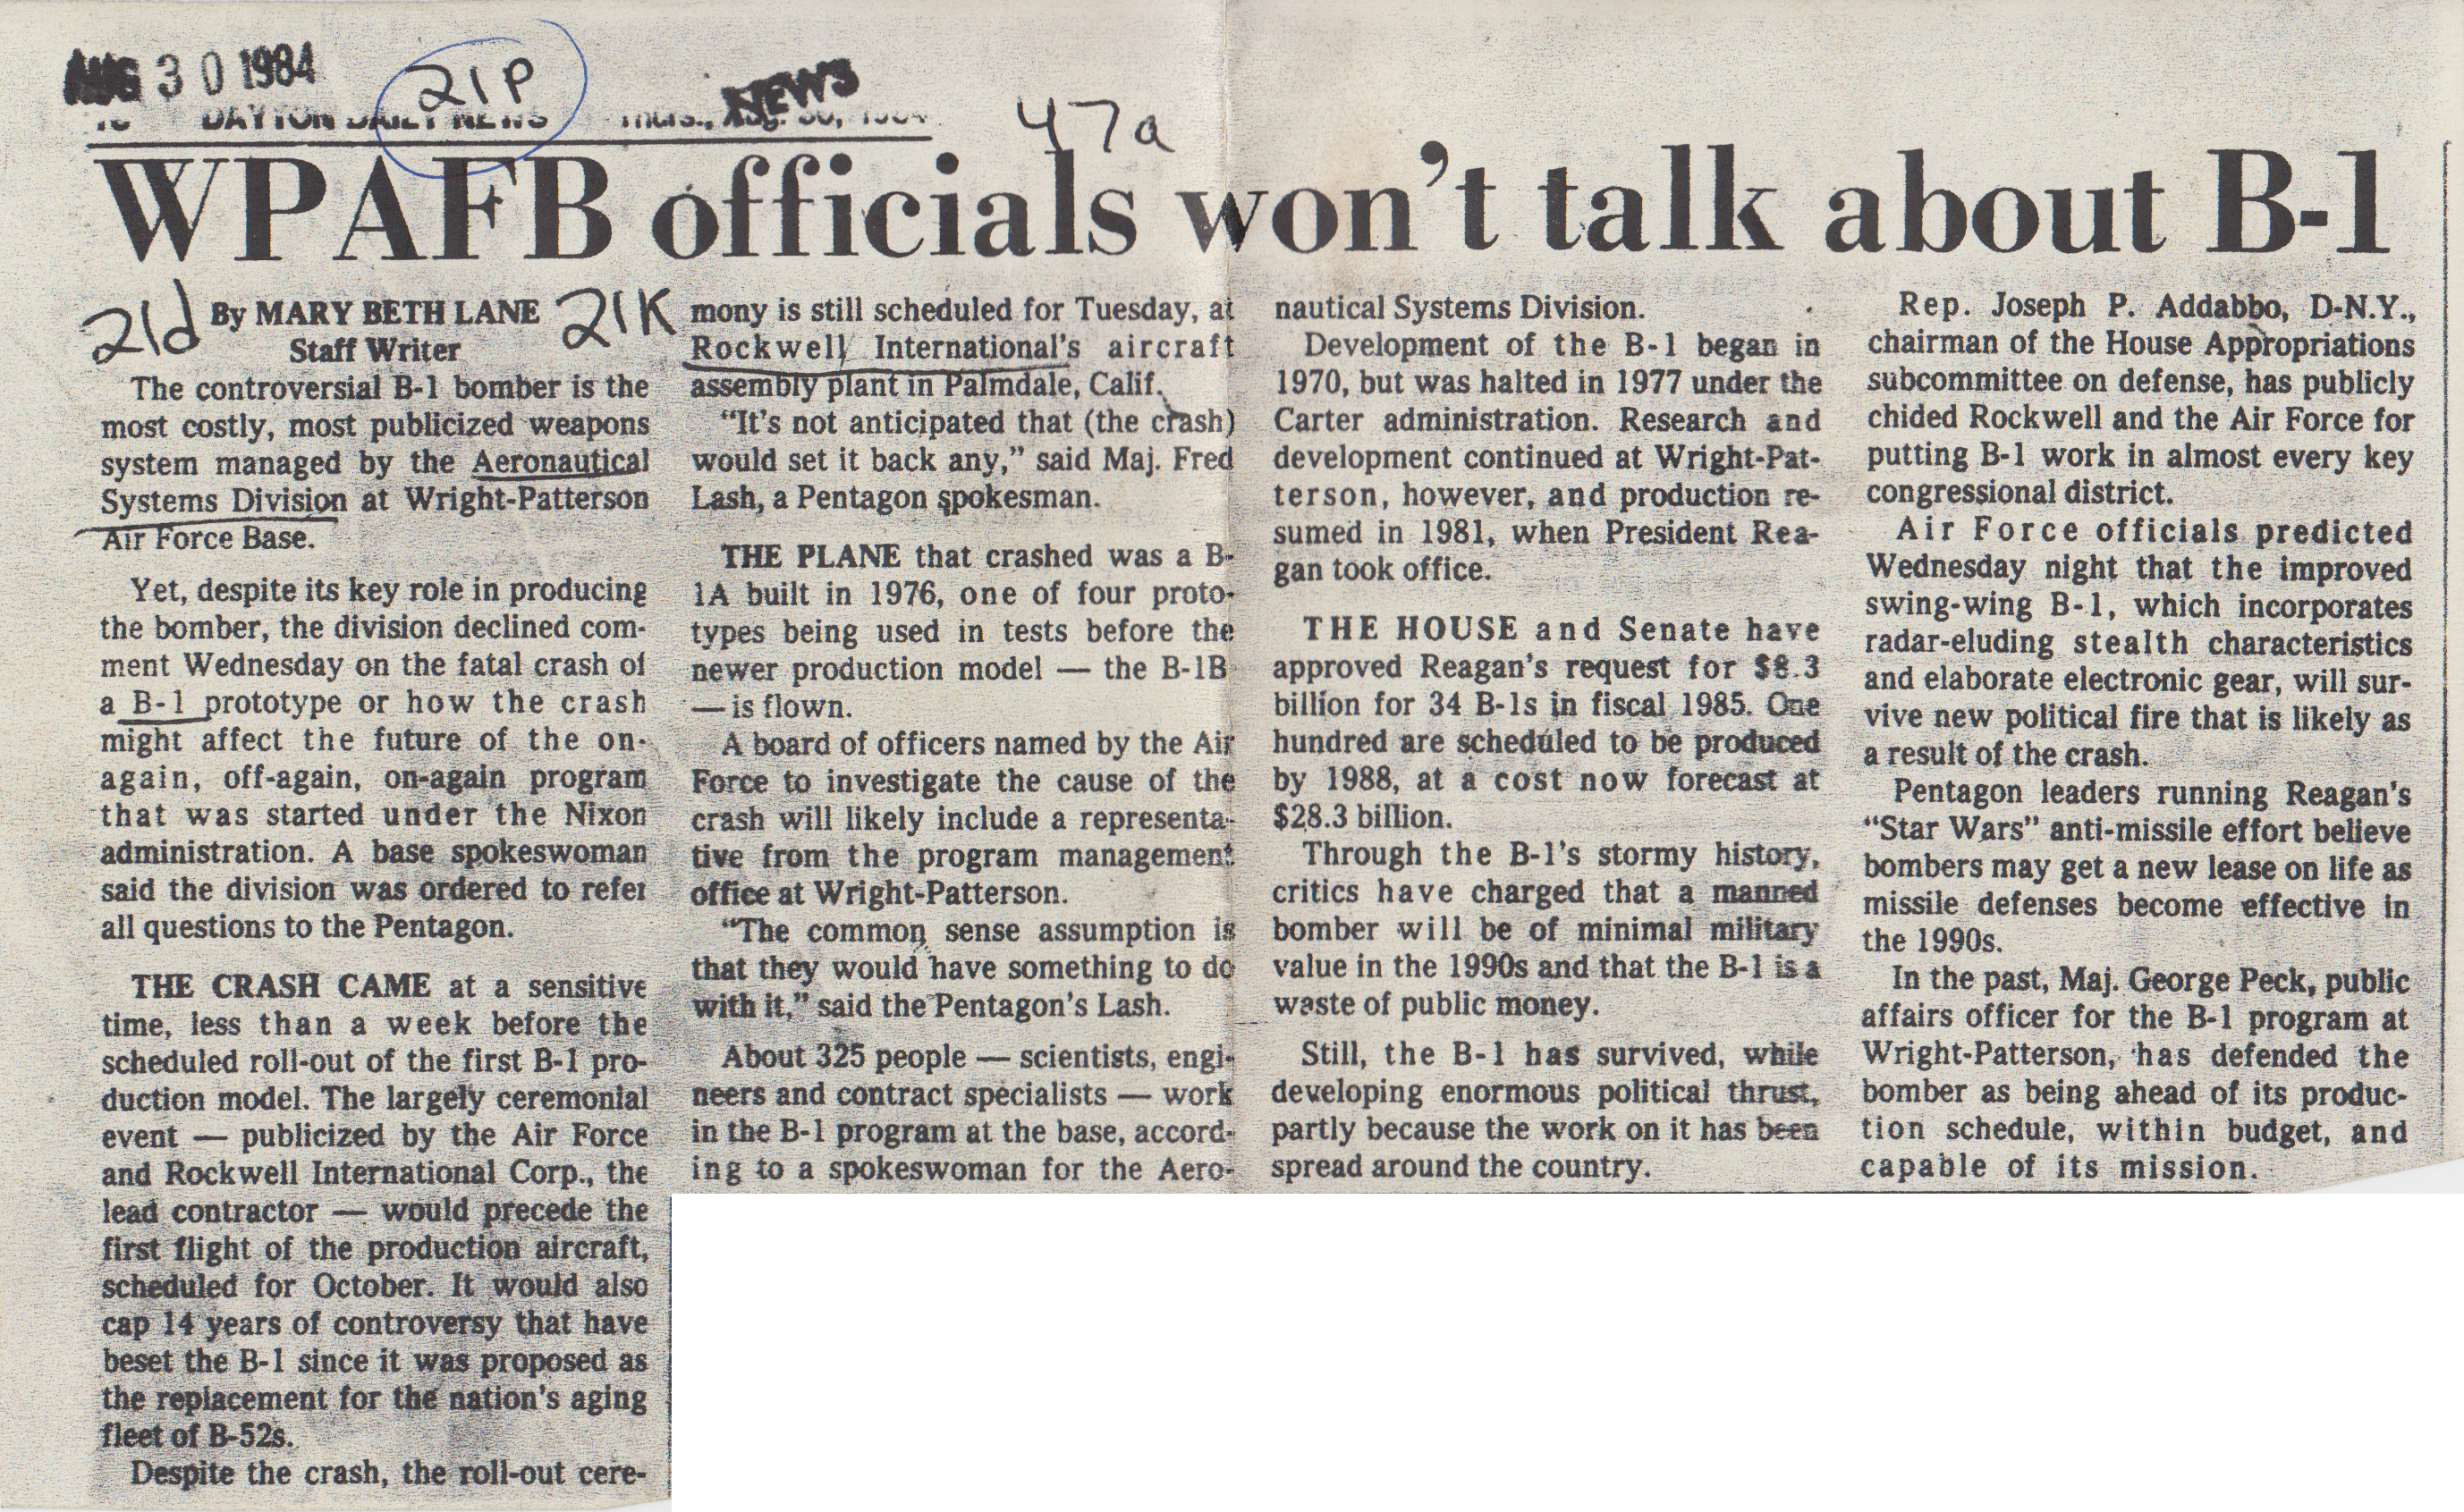 "WPAFB officials won't talk about B-1," referring to the crash of a B-1A in Aug. 1984. Dayton Daily News article, 30 Aug. 1984.